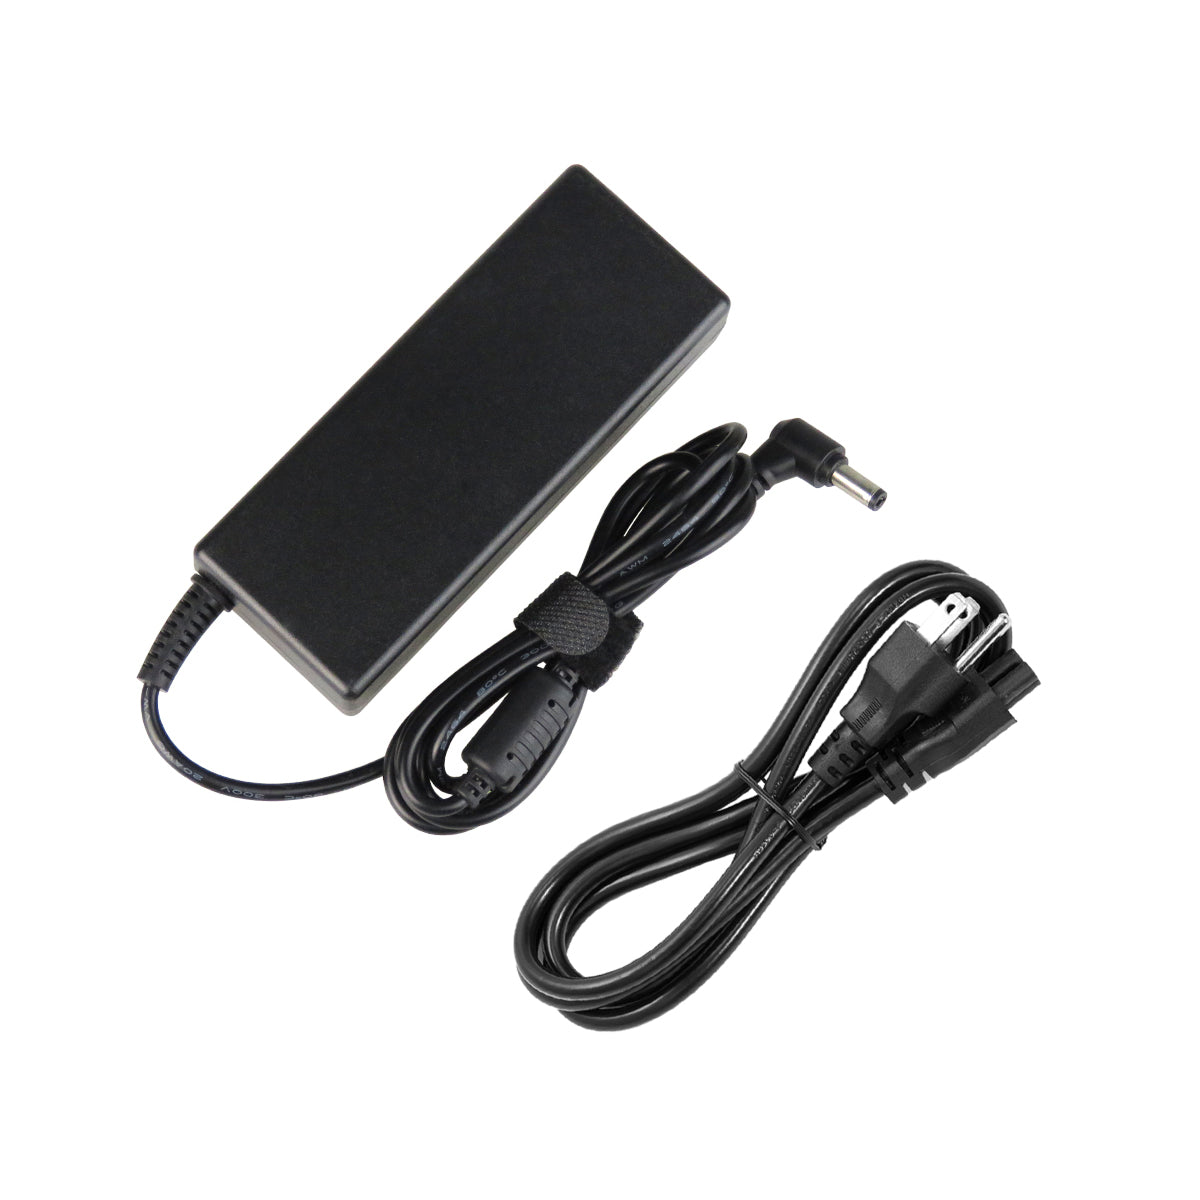 AC Adapter Charger for ASUS X55C-SI30301N Laptop.